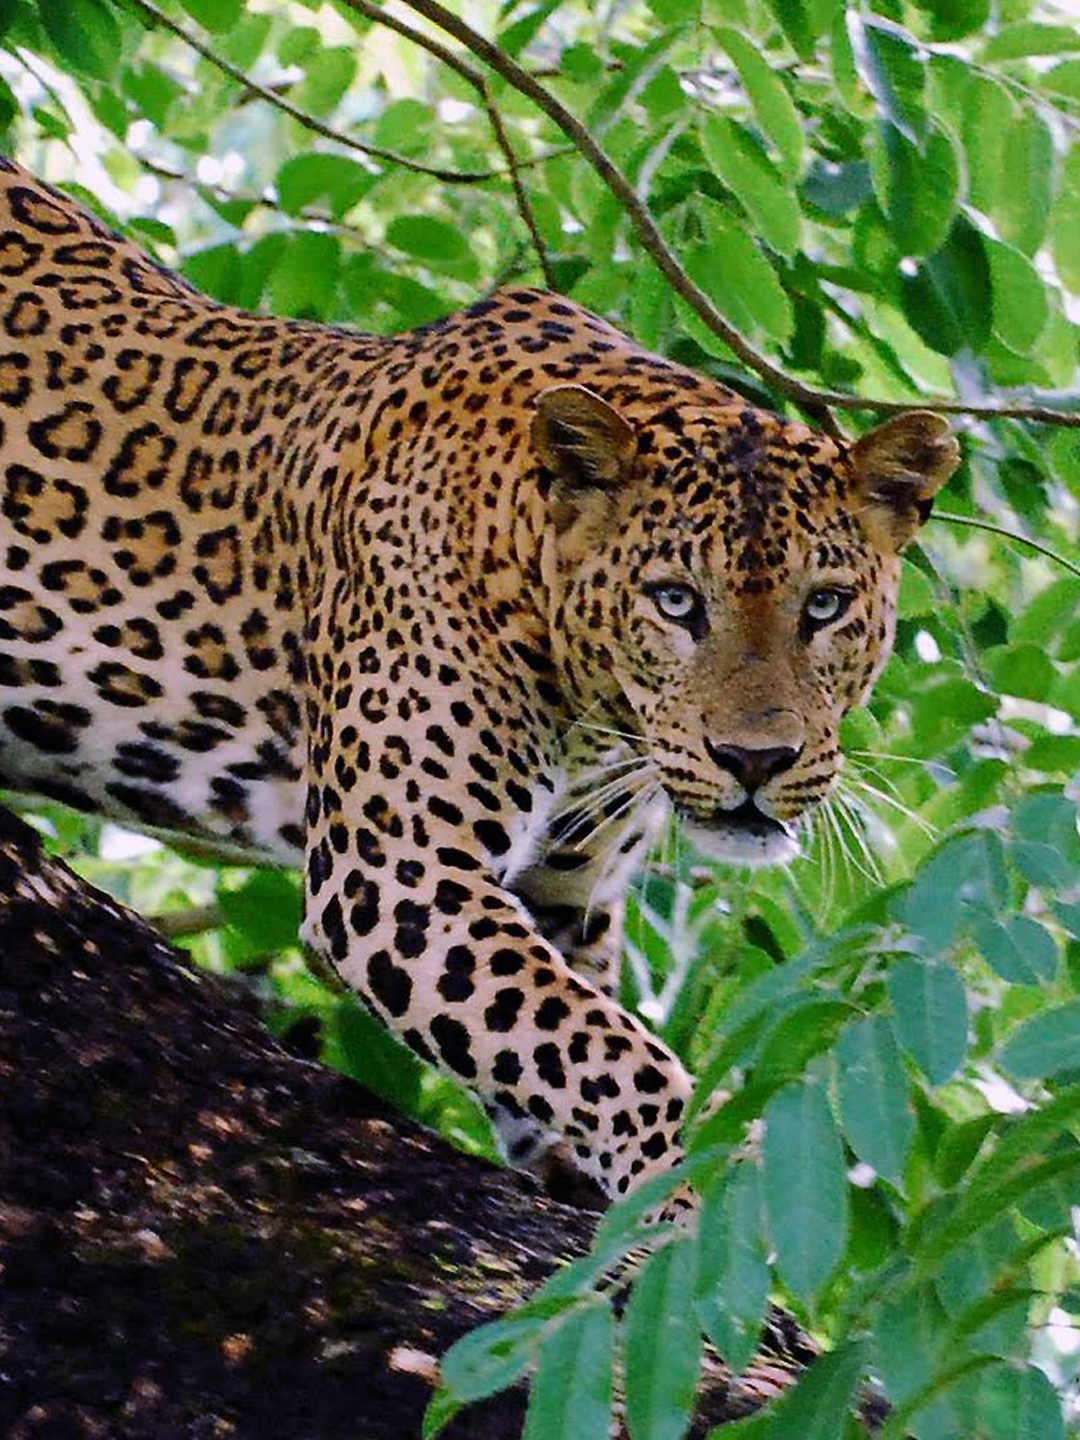 In the first two months of 2018, India has lost 106 leopards.